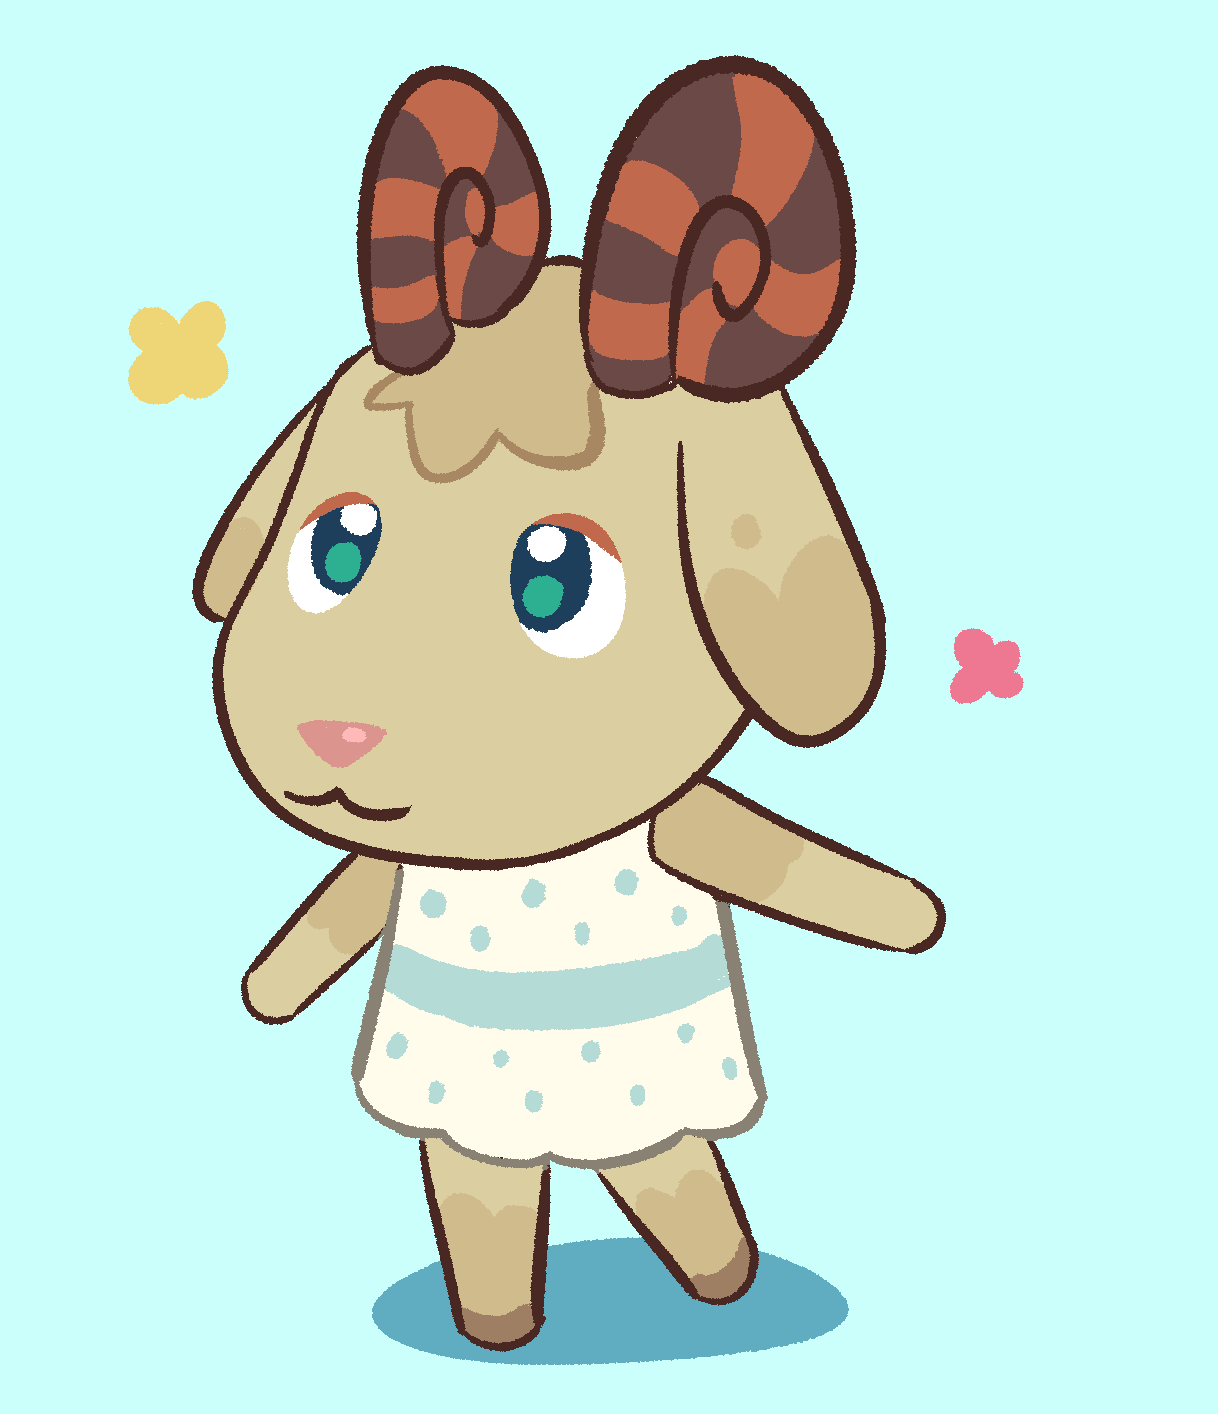 Fennel as an Animal Crossing villager